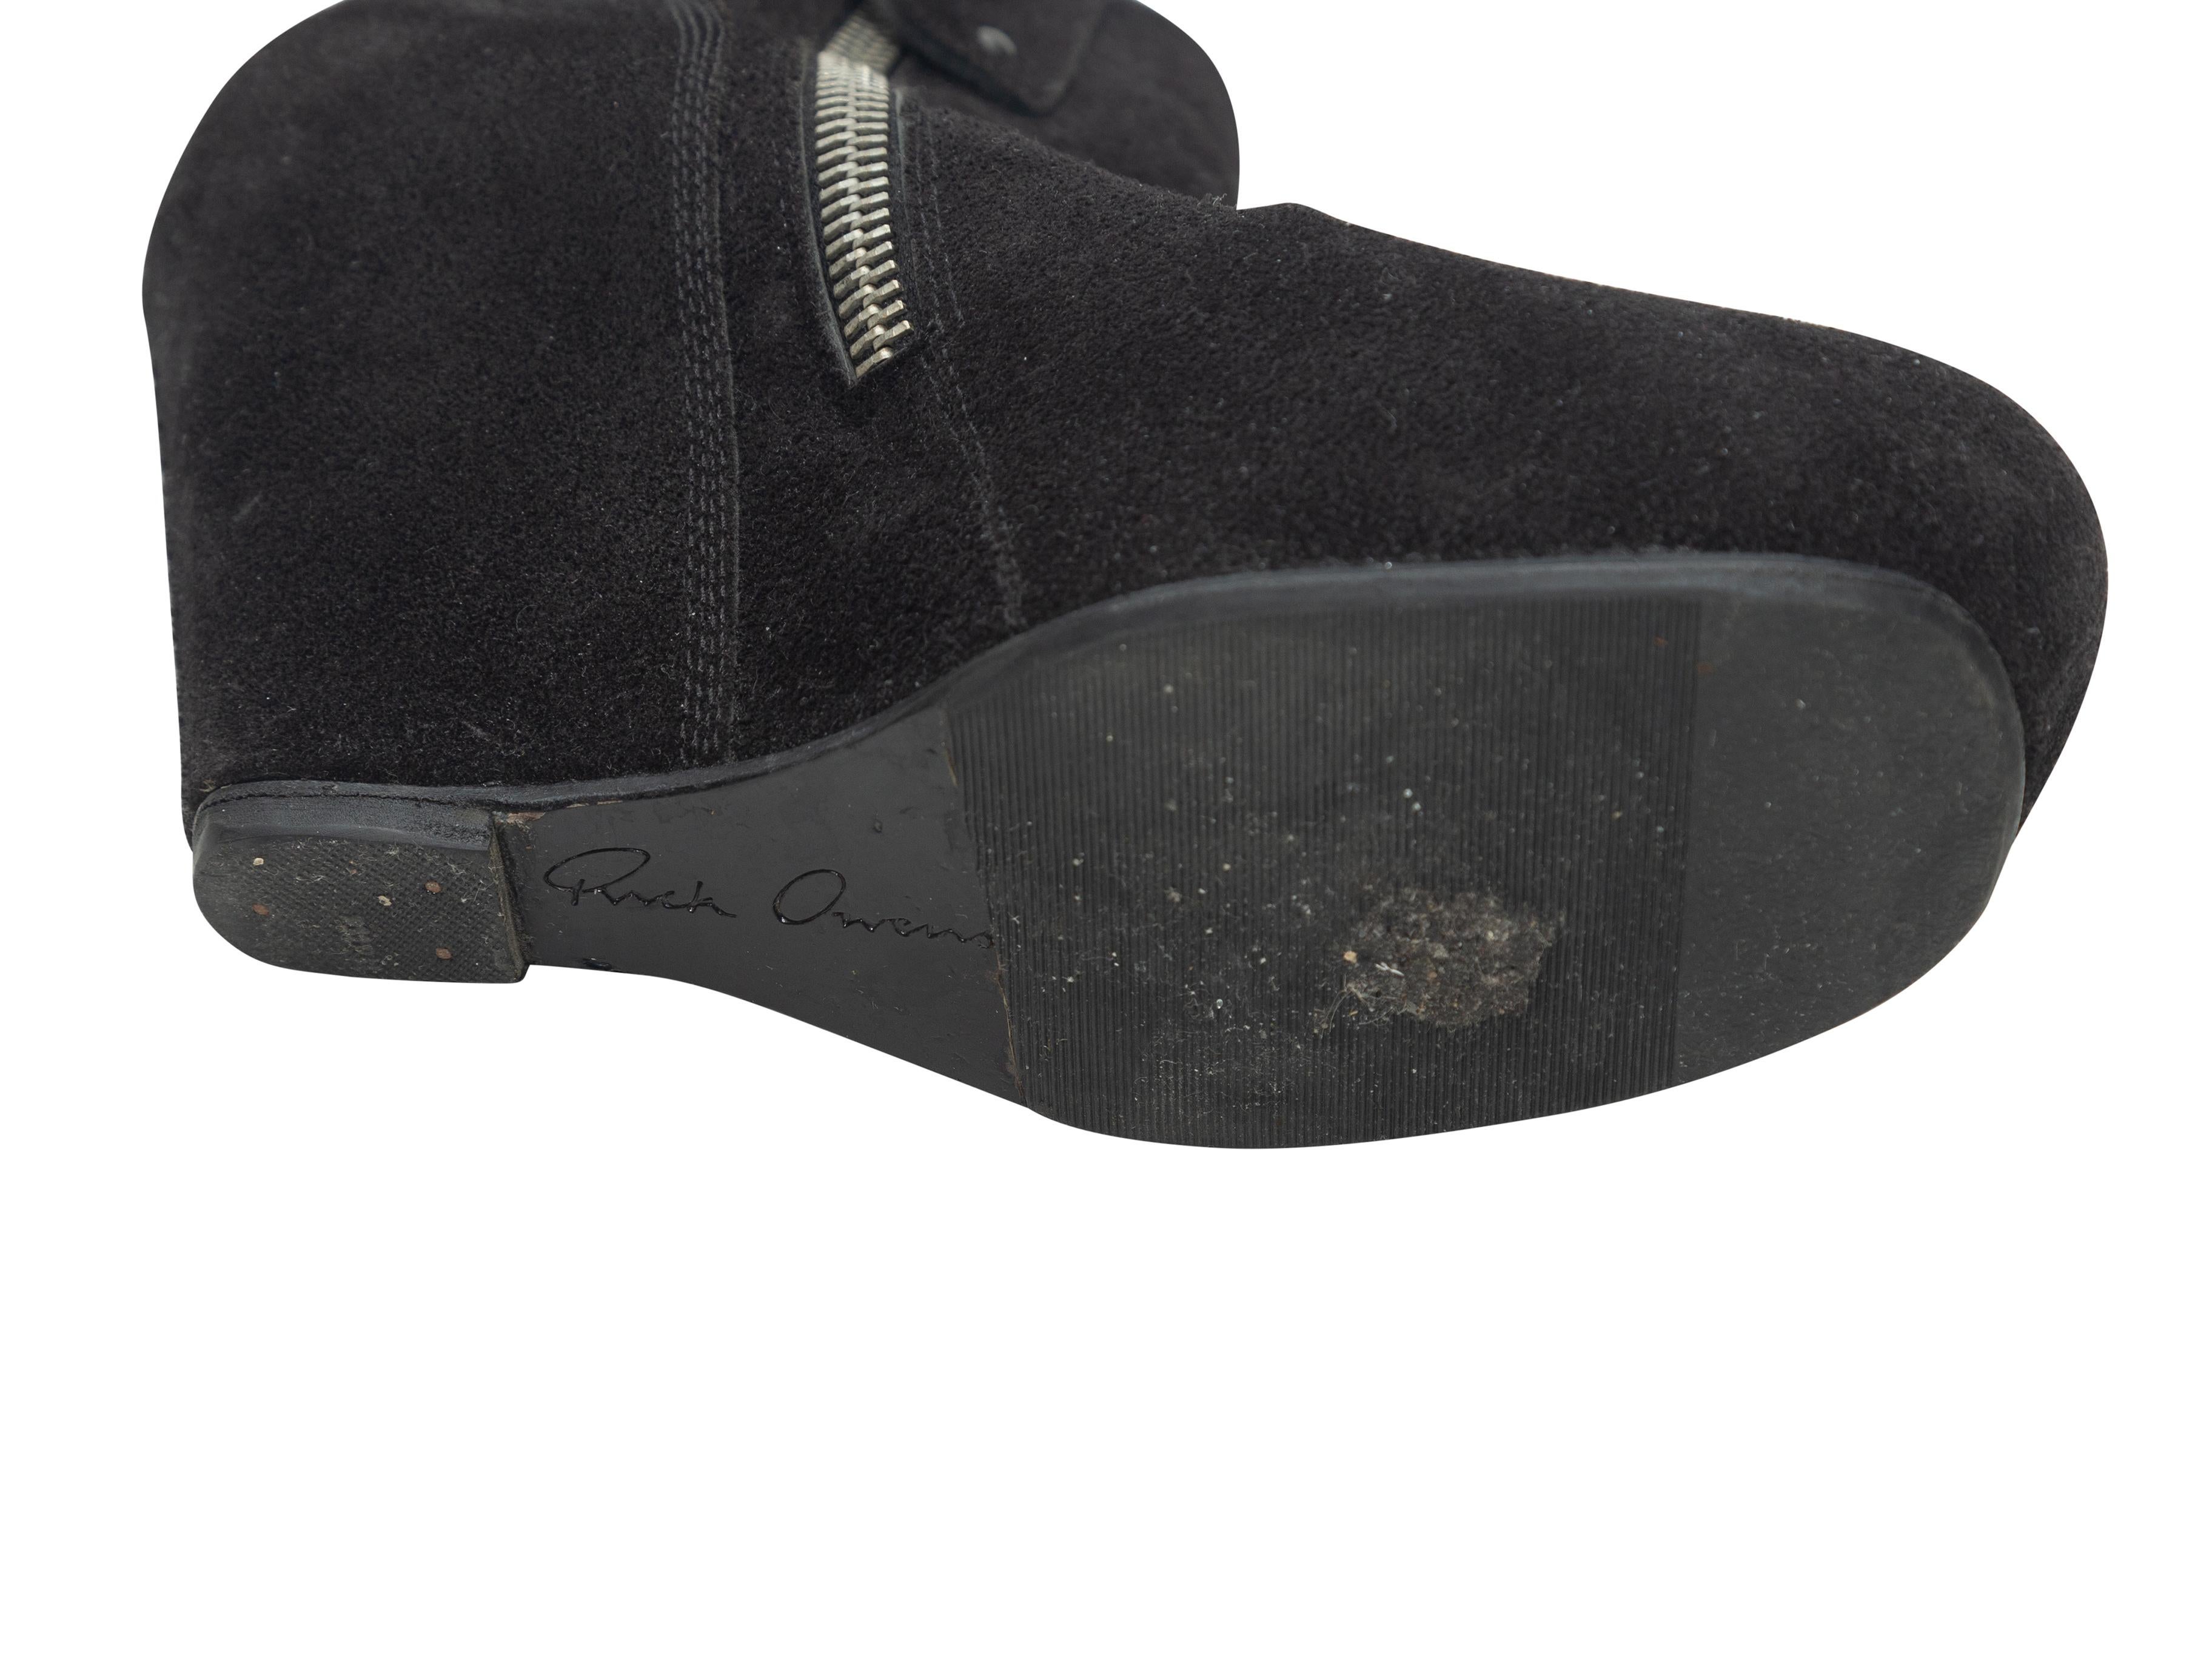 Women's Rick Owens Black Suede Wedge Ankle Boots